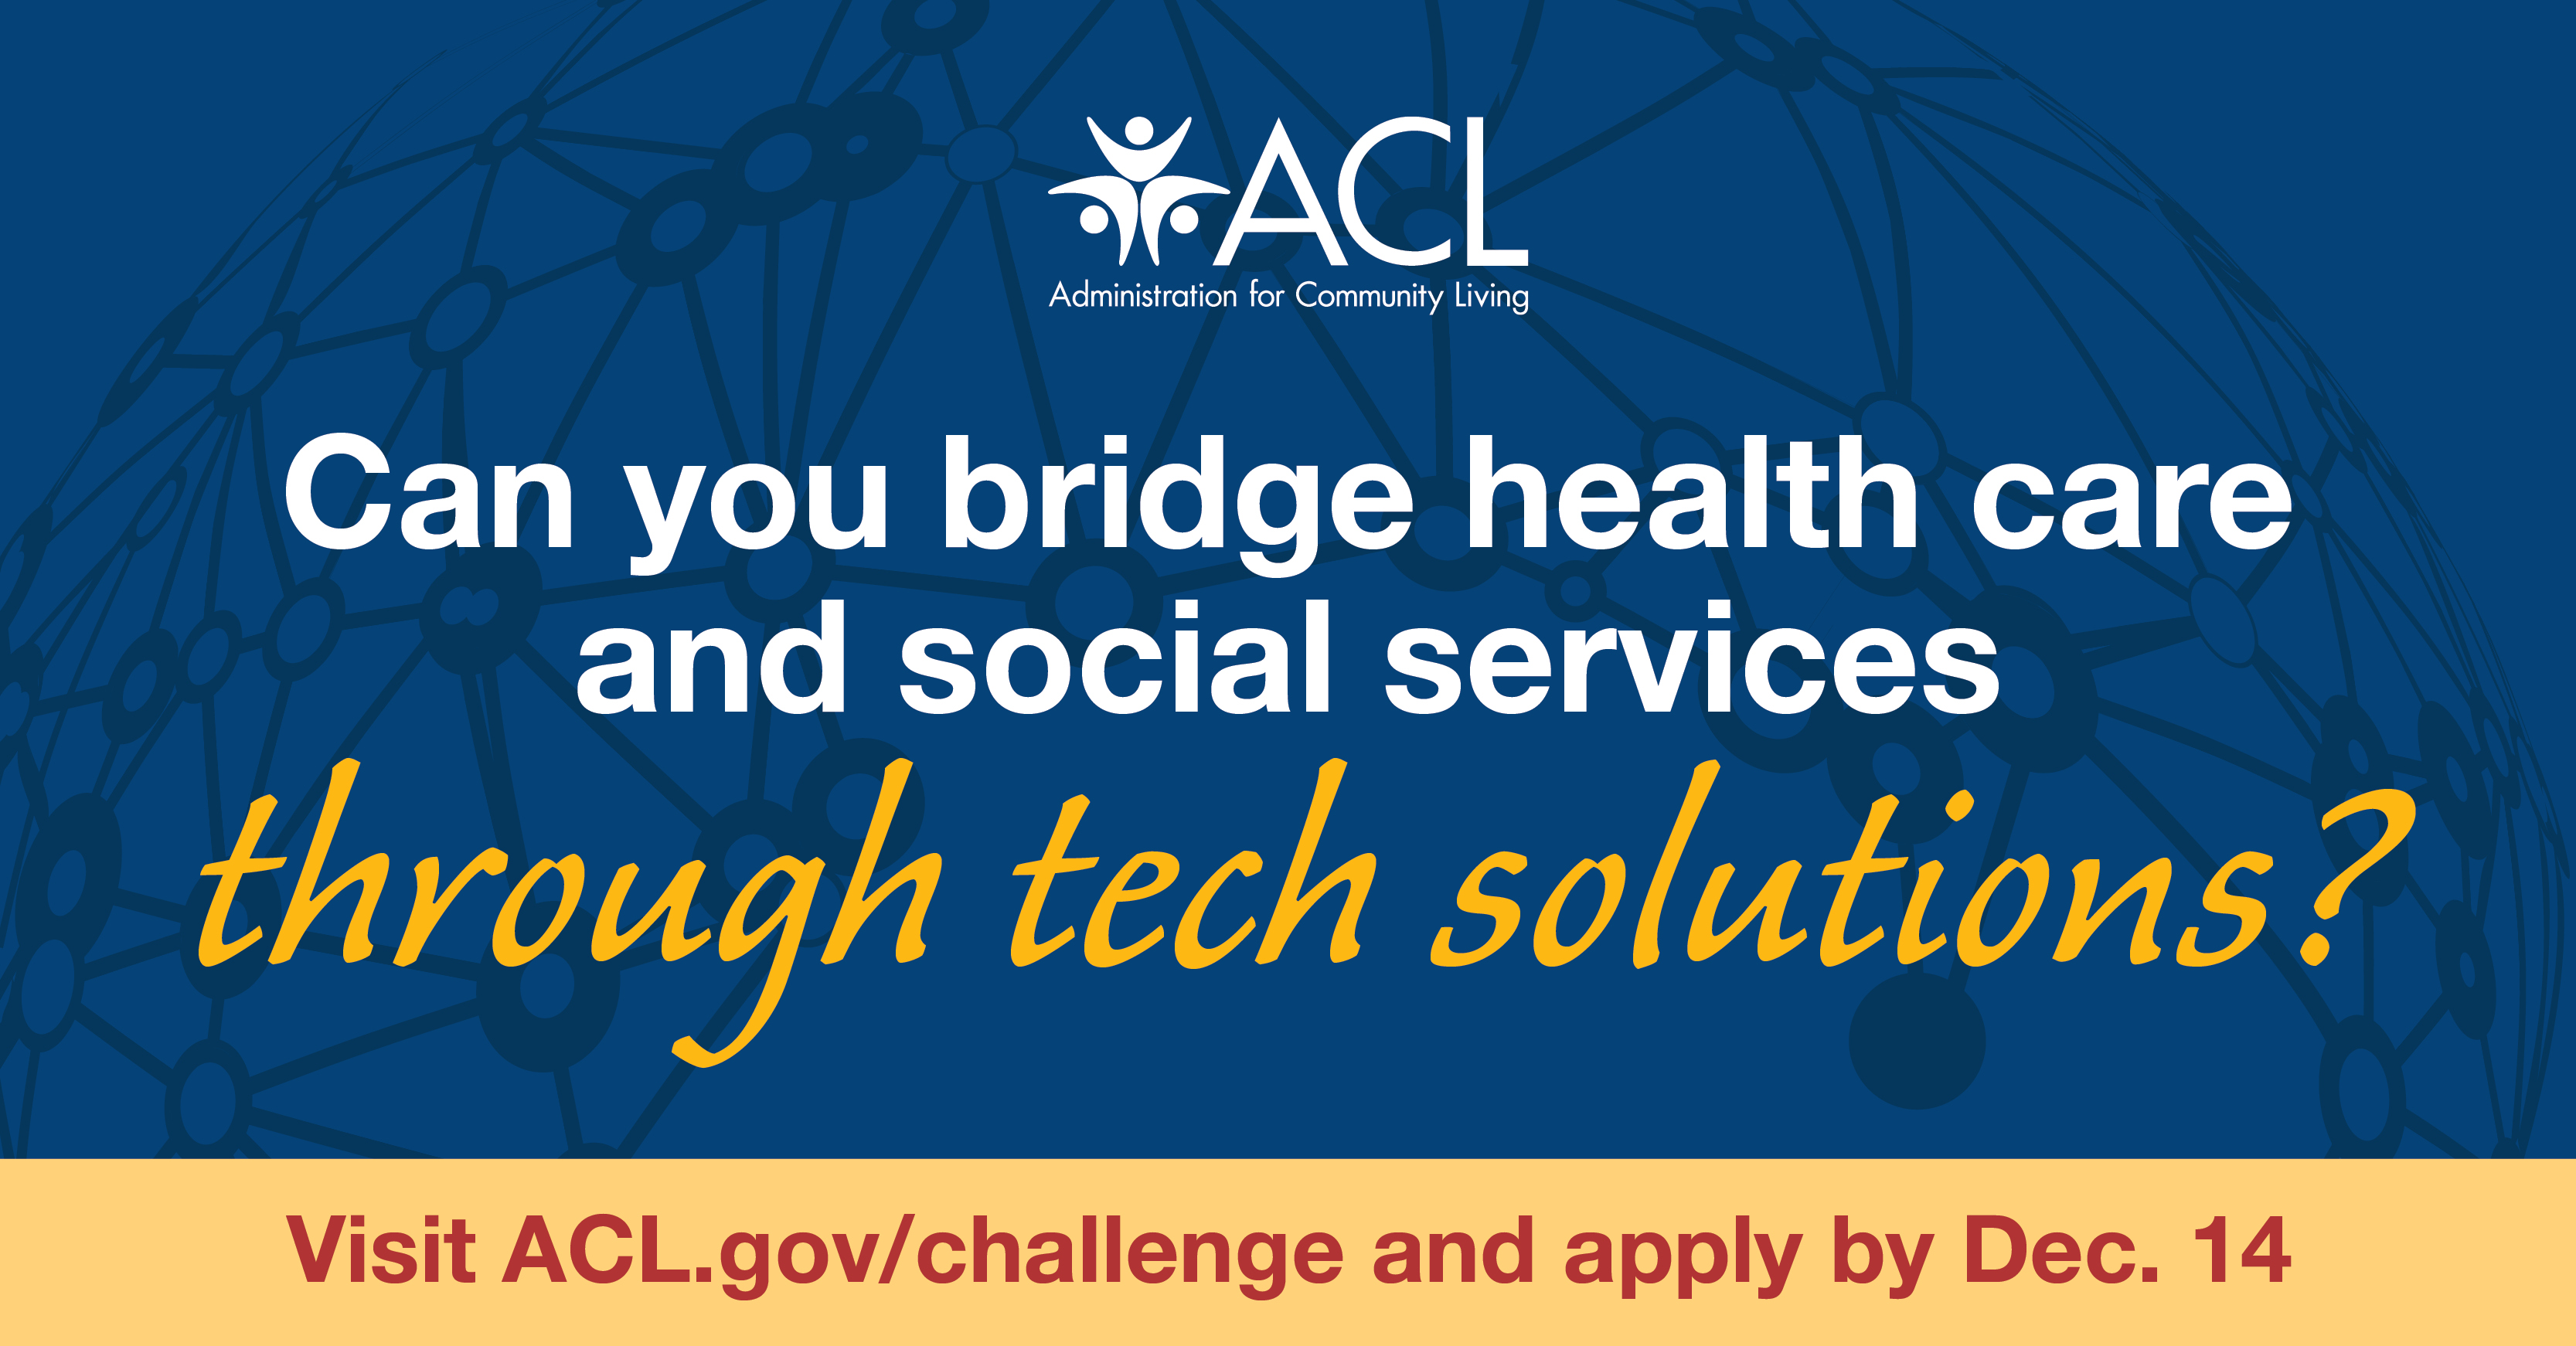 Can you bridge health care and social services through tech solutions?